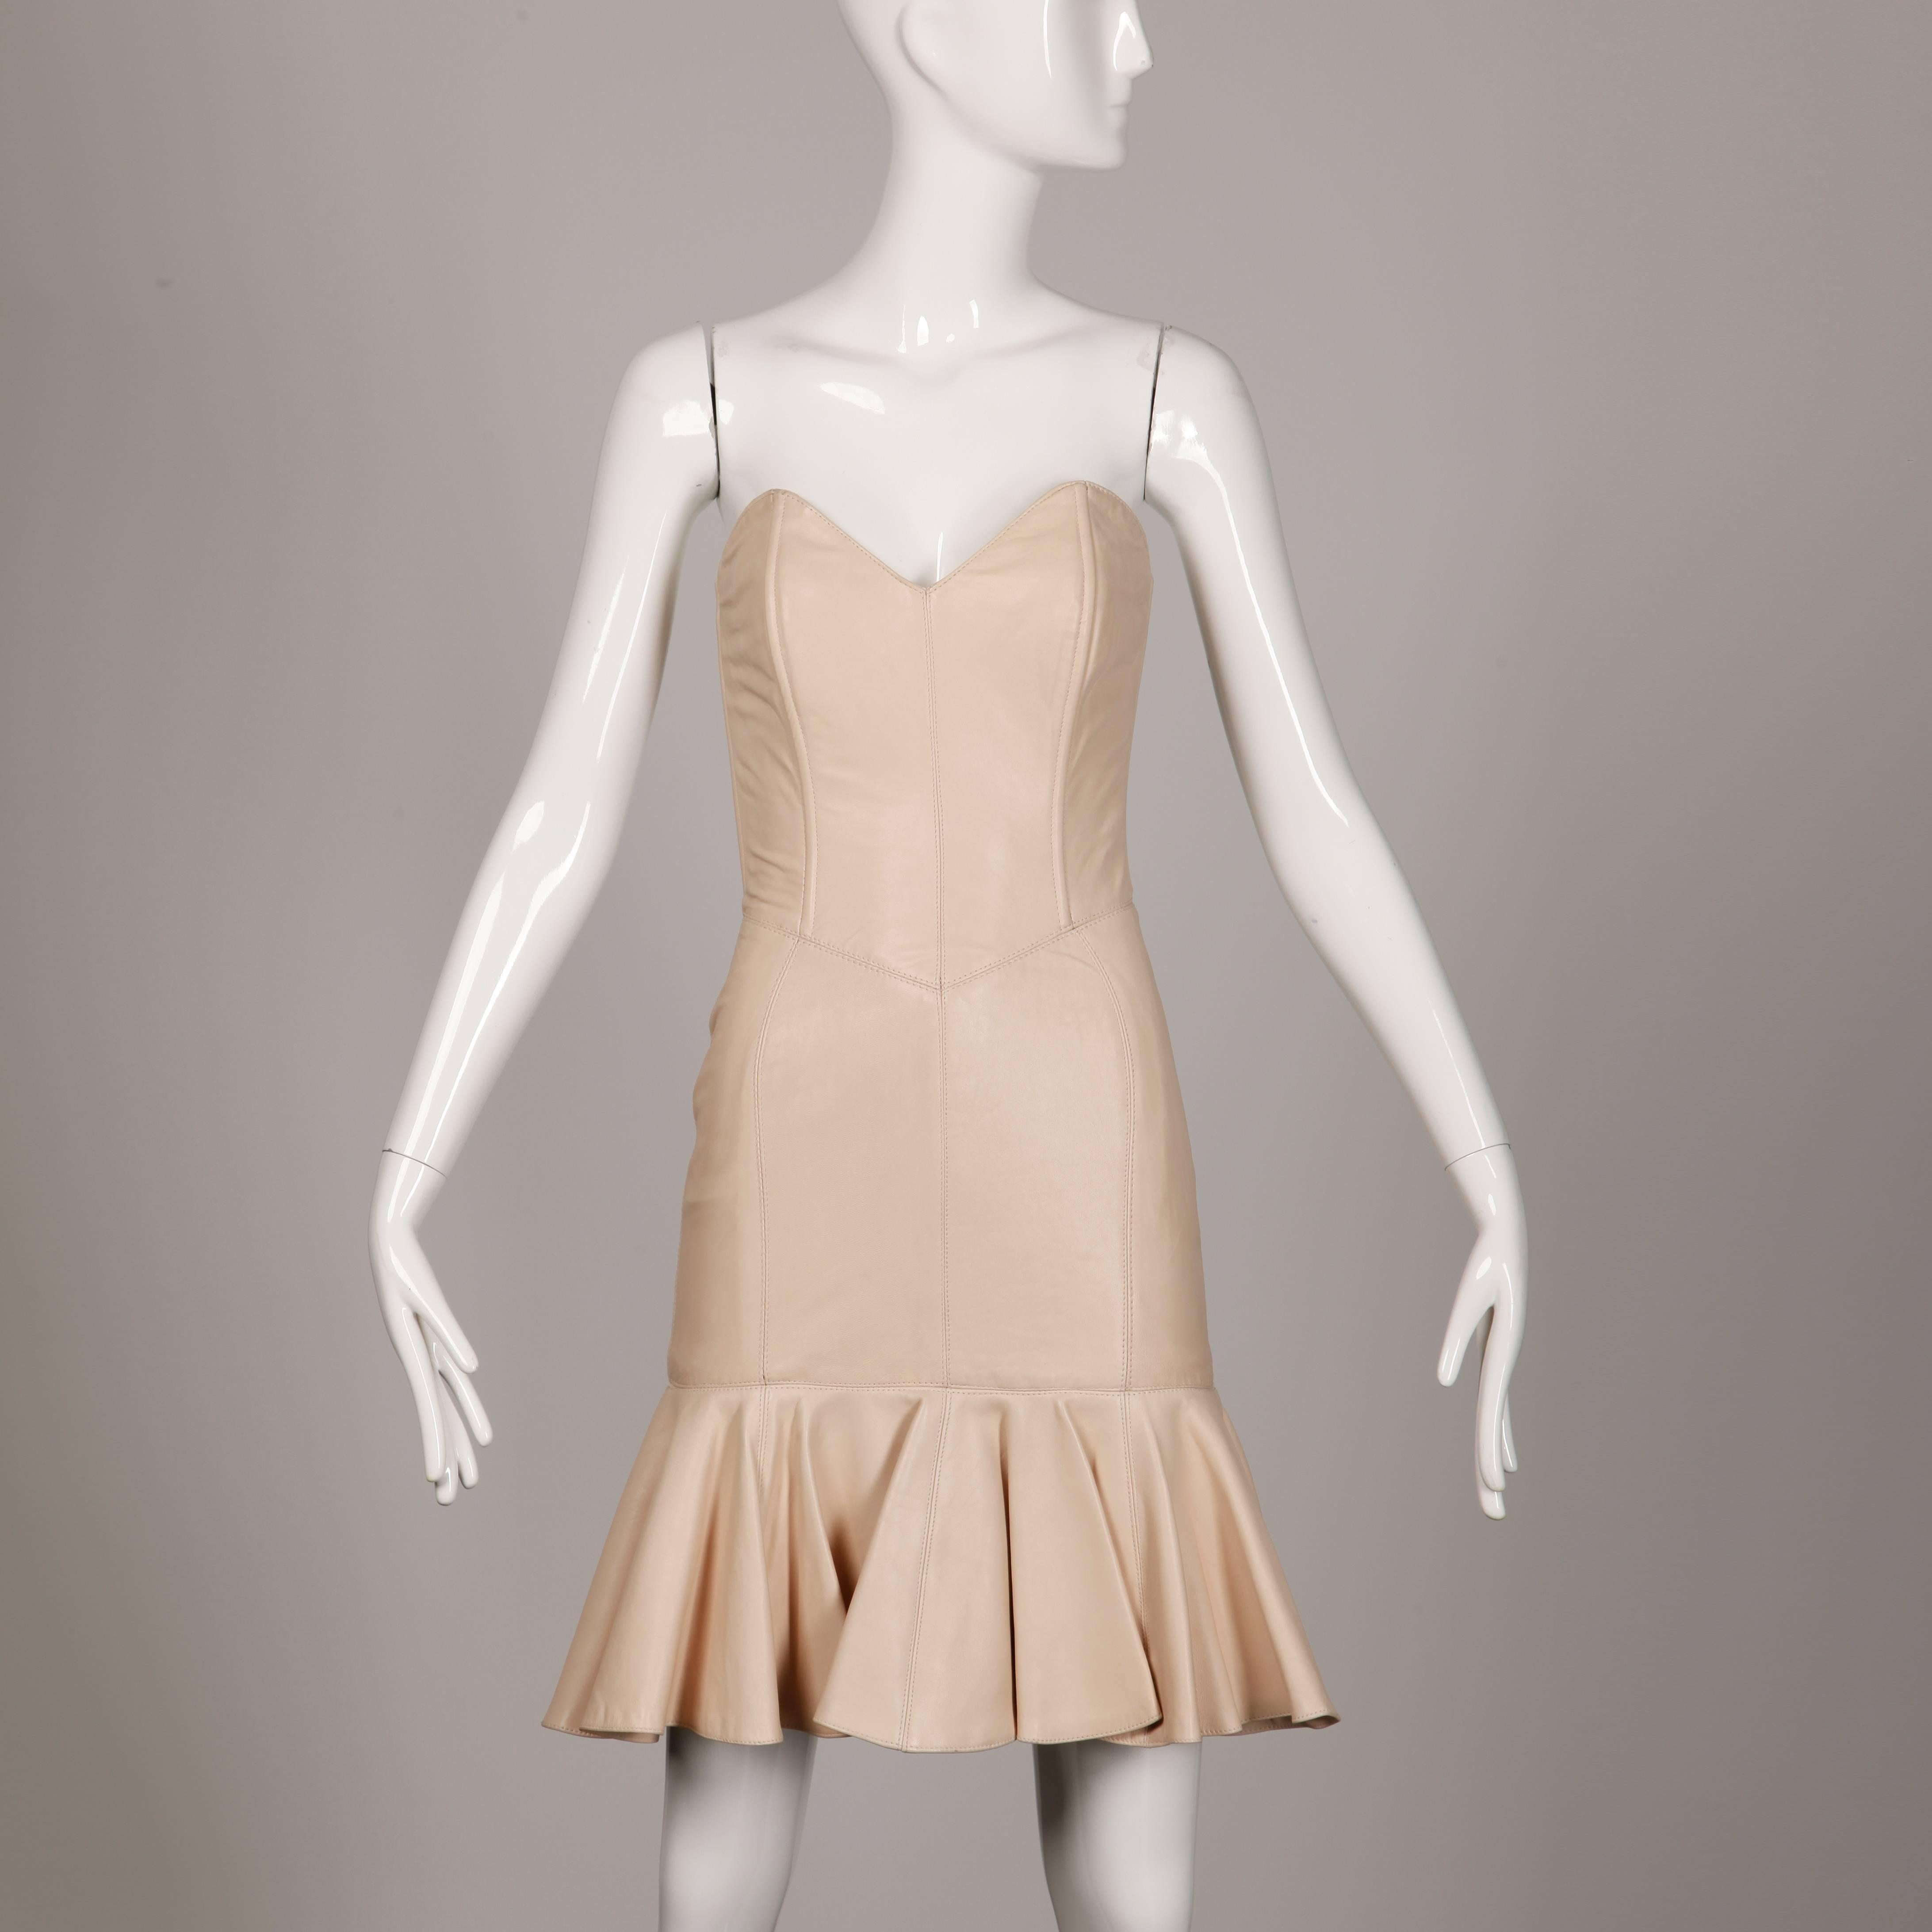 Soft blush pink leather dress by Michael Hoban for North Beach Leather. Strapless sweetheart bust and ruffled hem. Sexy body hugging fit. This piece is fully lined and features rear zip and hook closure. The marked size is XS and the dress fits true